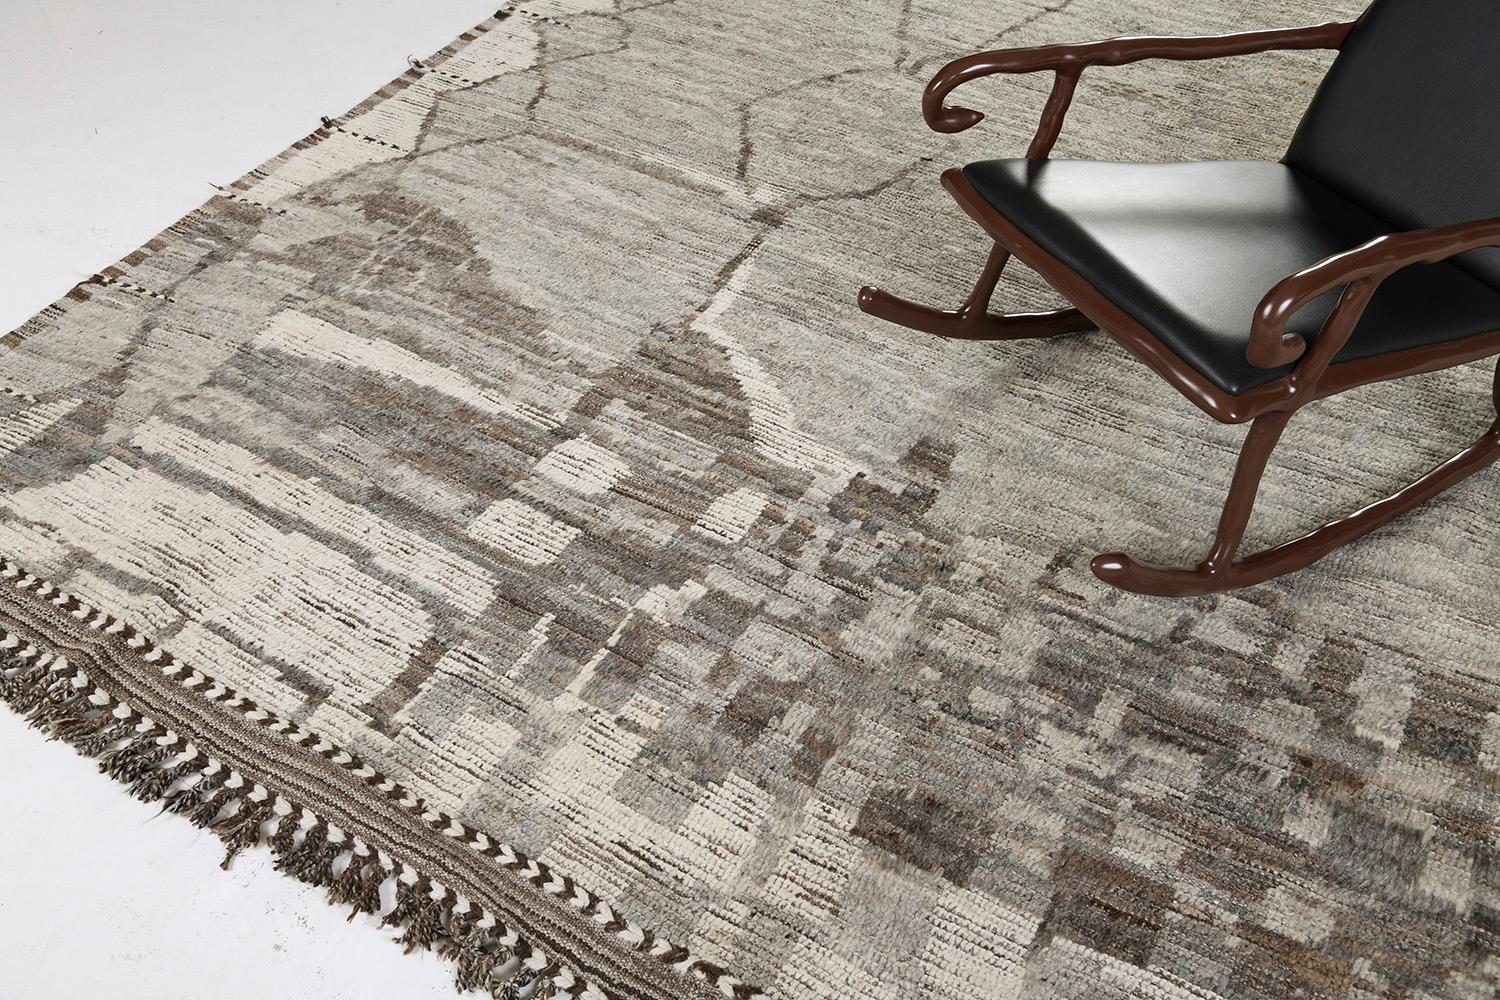 Snug your feet around with this stunning creation from our Atlas Collections. An impressive Adrar Rug that transforms your room into a modern-contemporary home interior. Natural brown and gray are impressively incorporated in their details with this